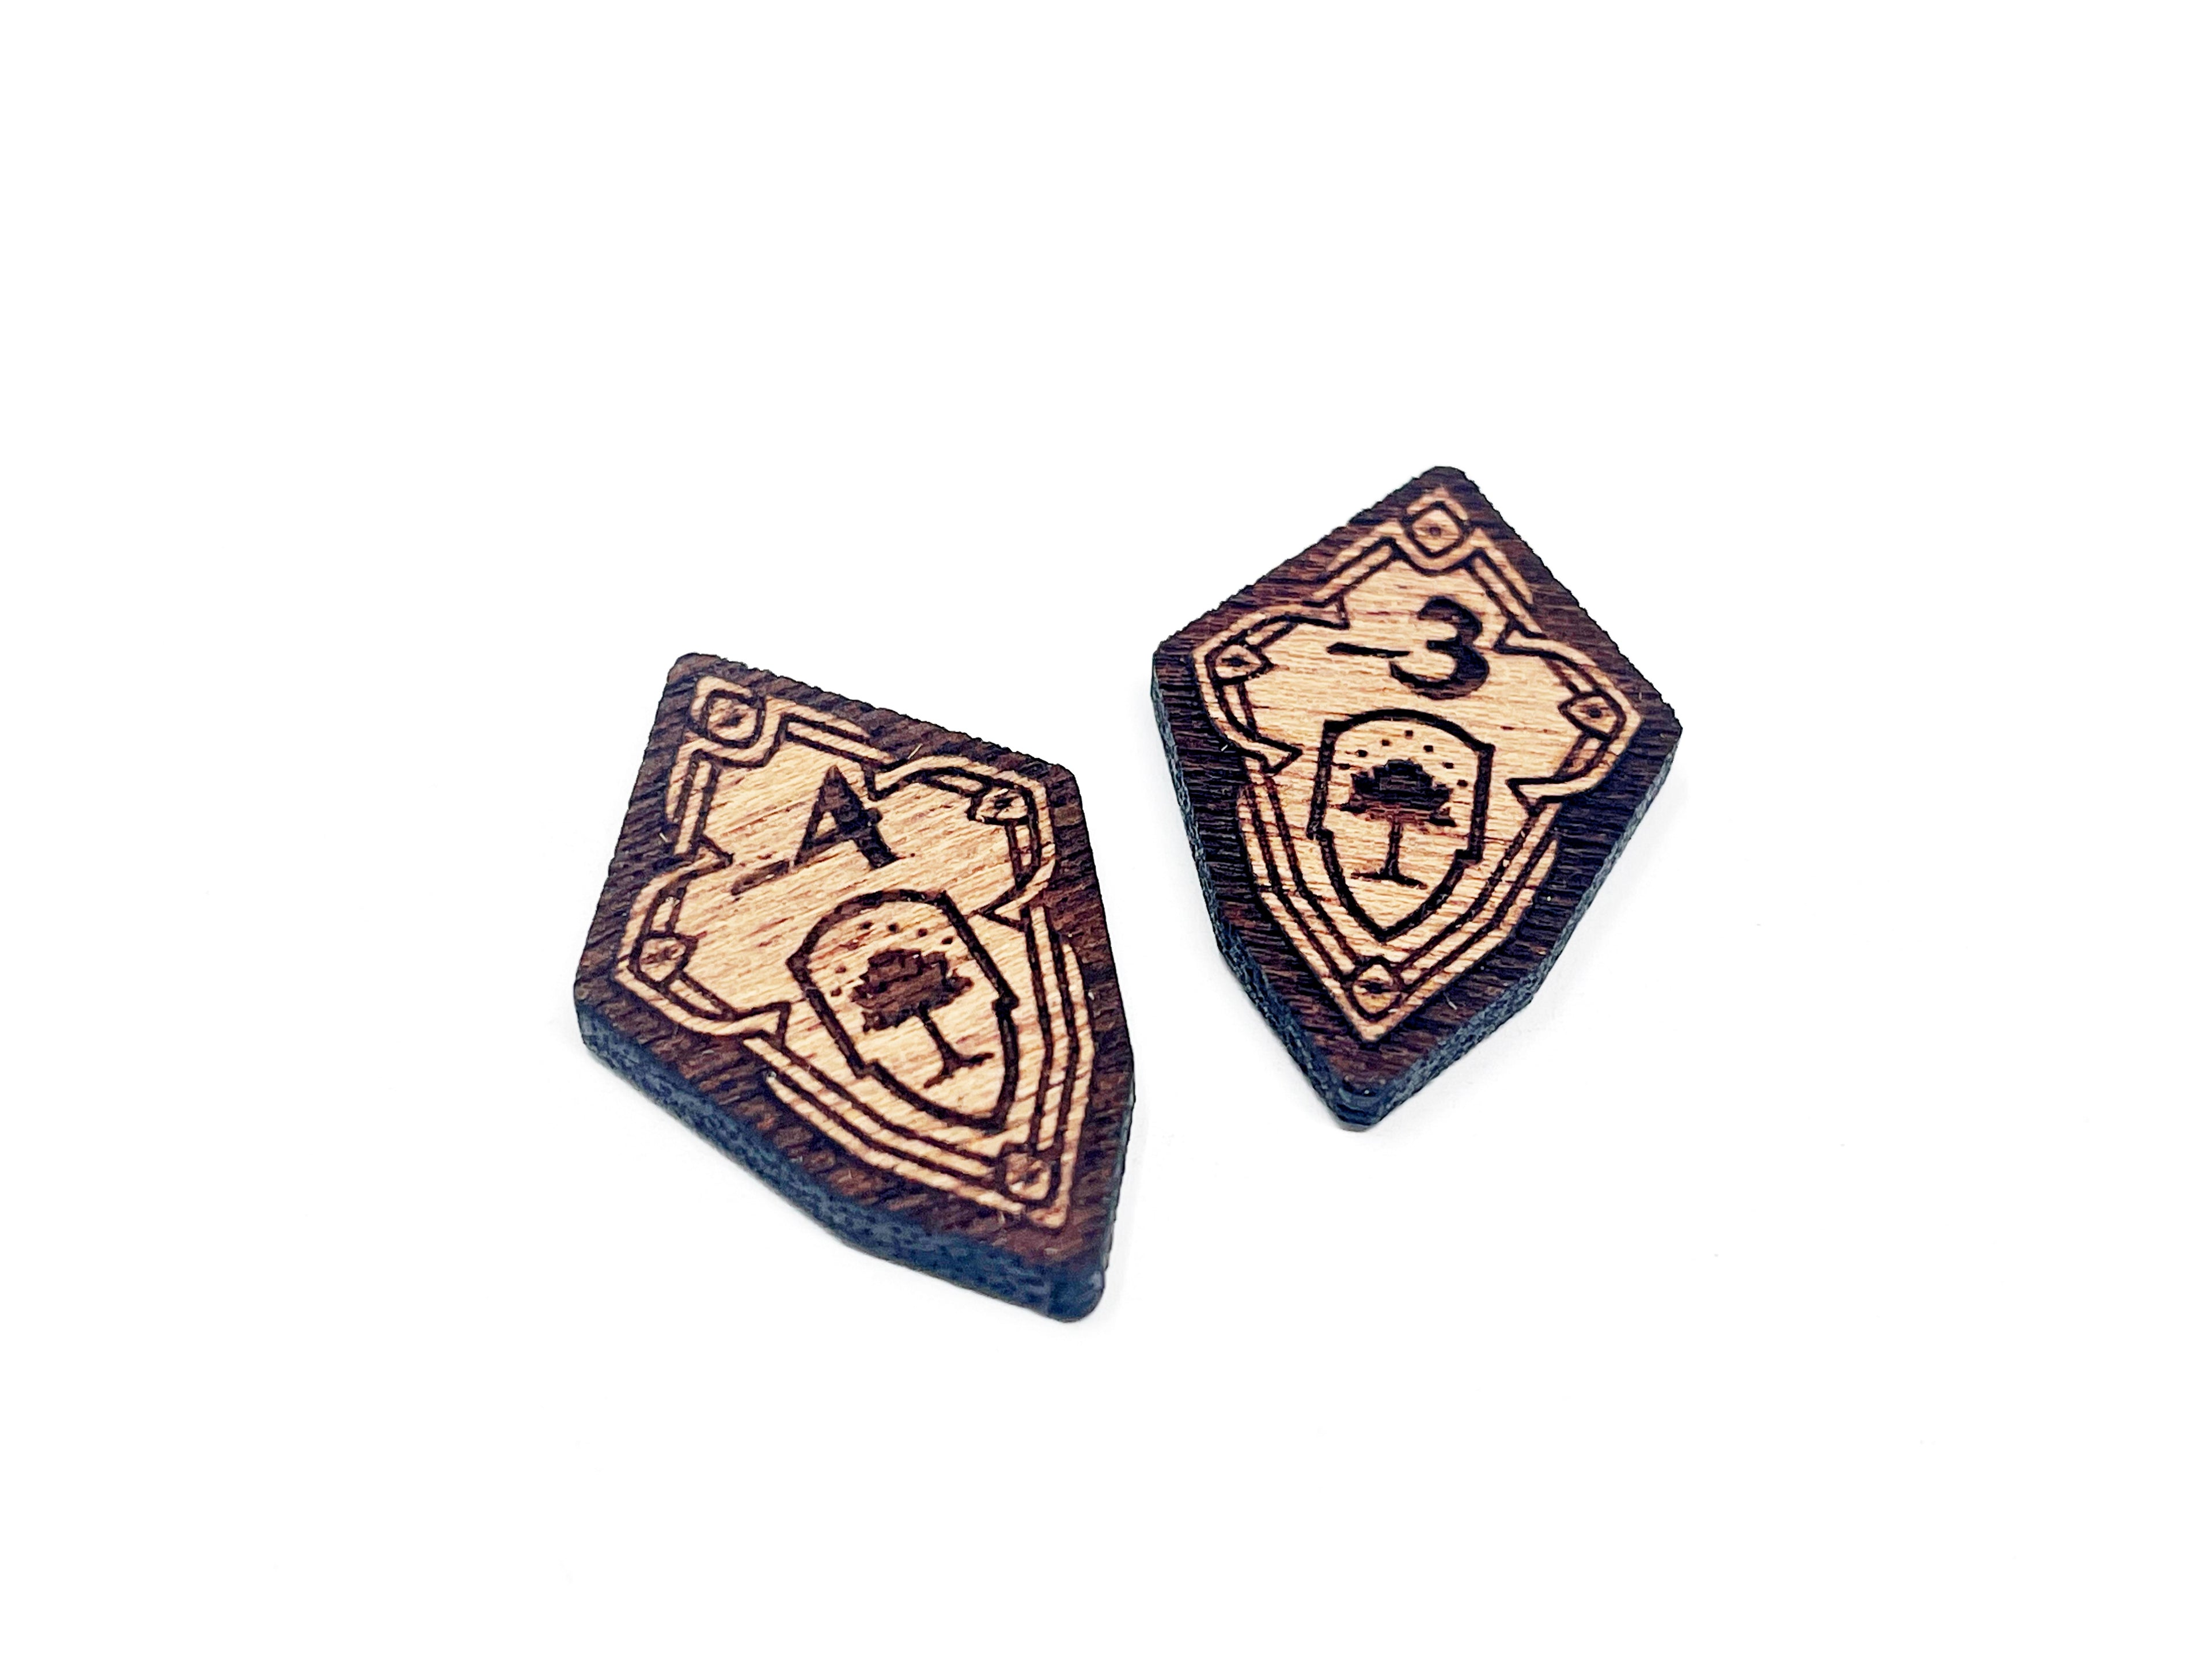 3/4 Defence Negative Stat Modifier Tokens - Solid Mahogany